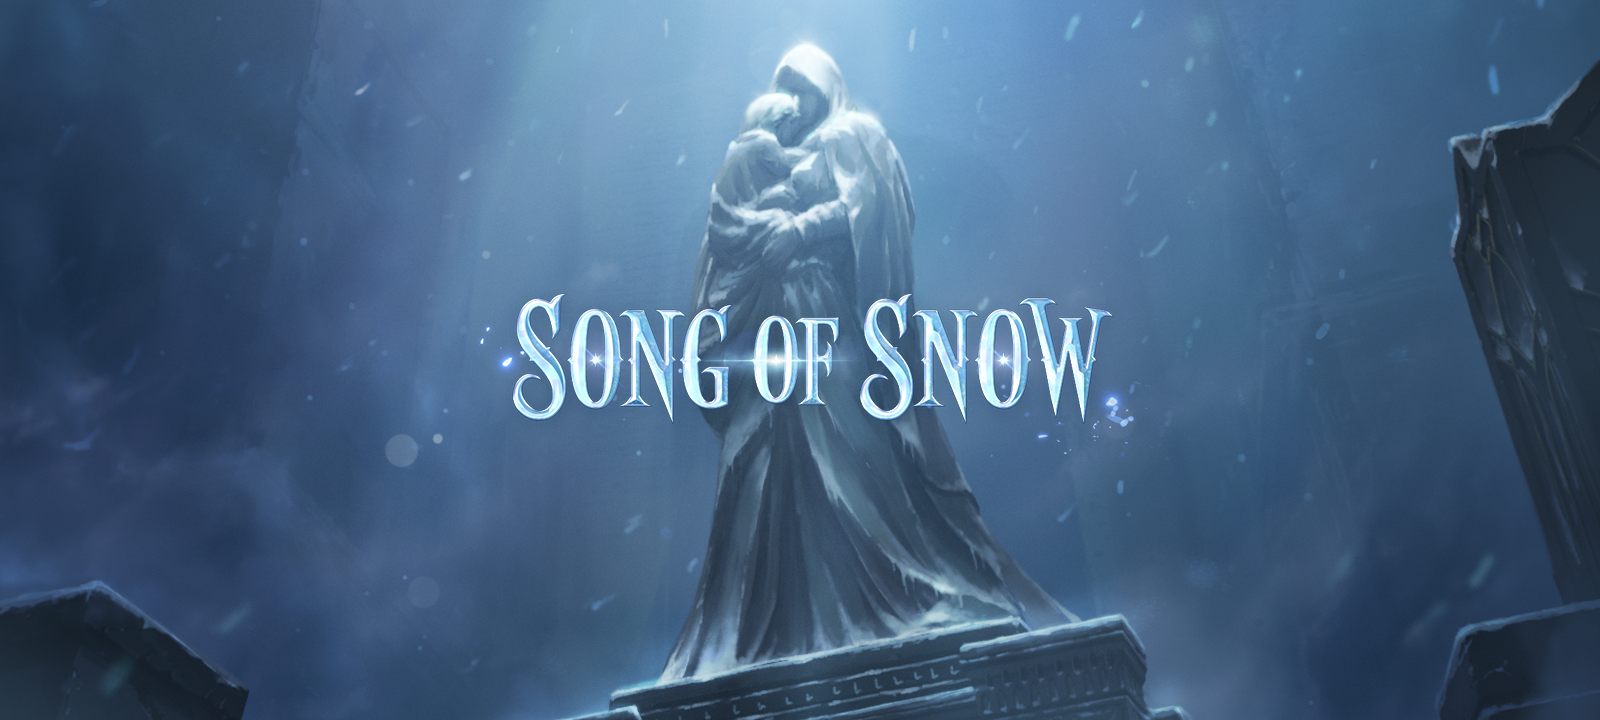 songofsnow.png